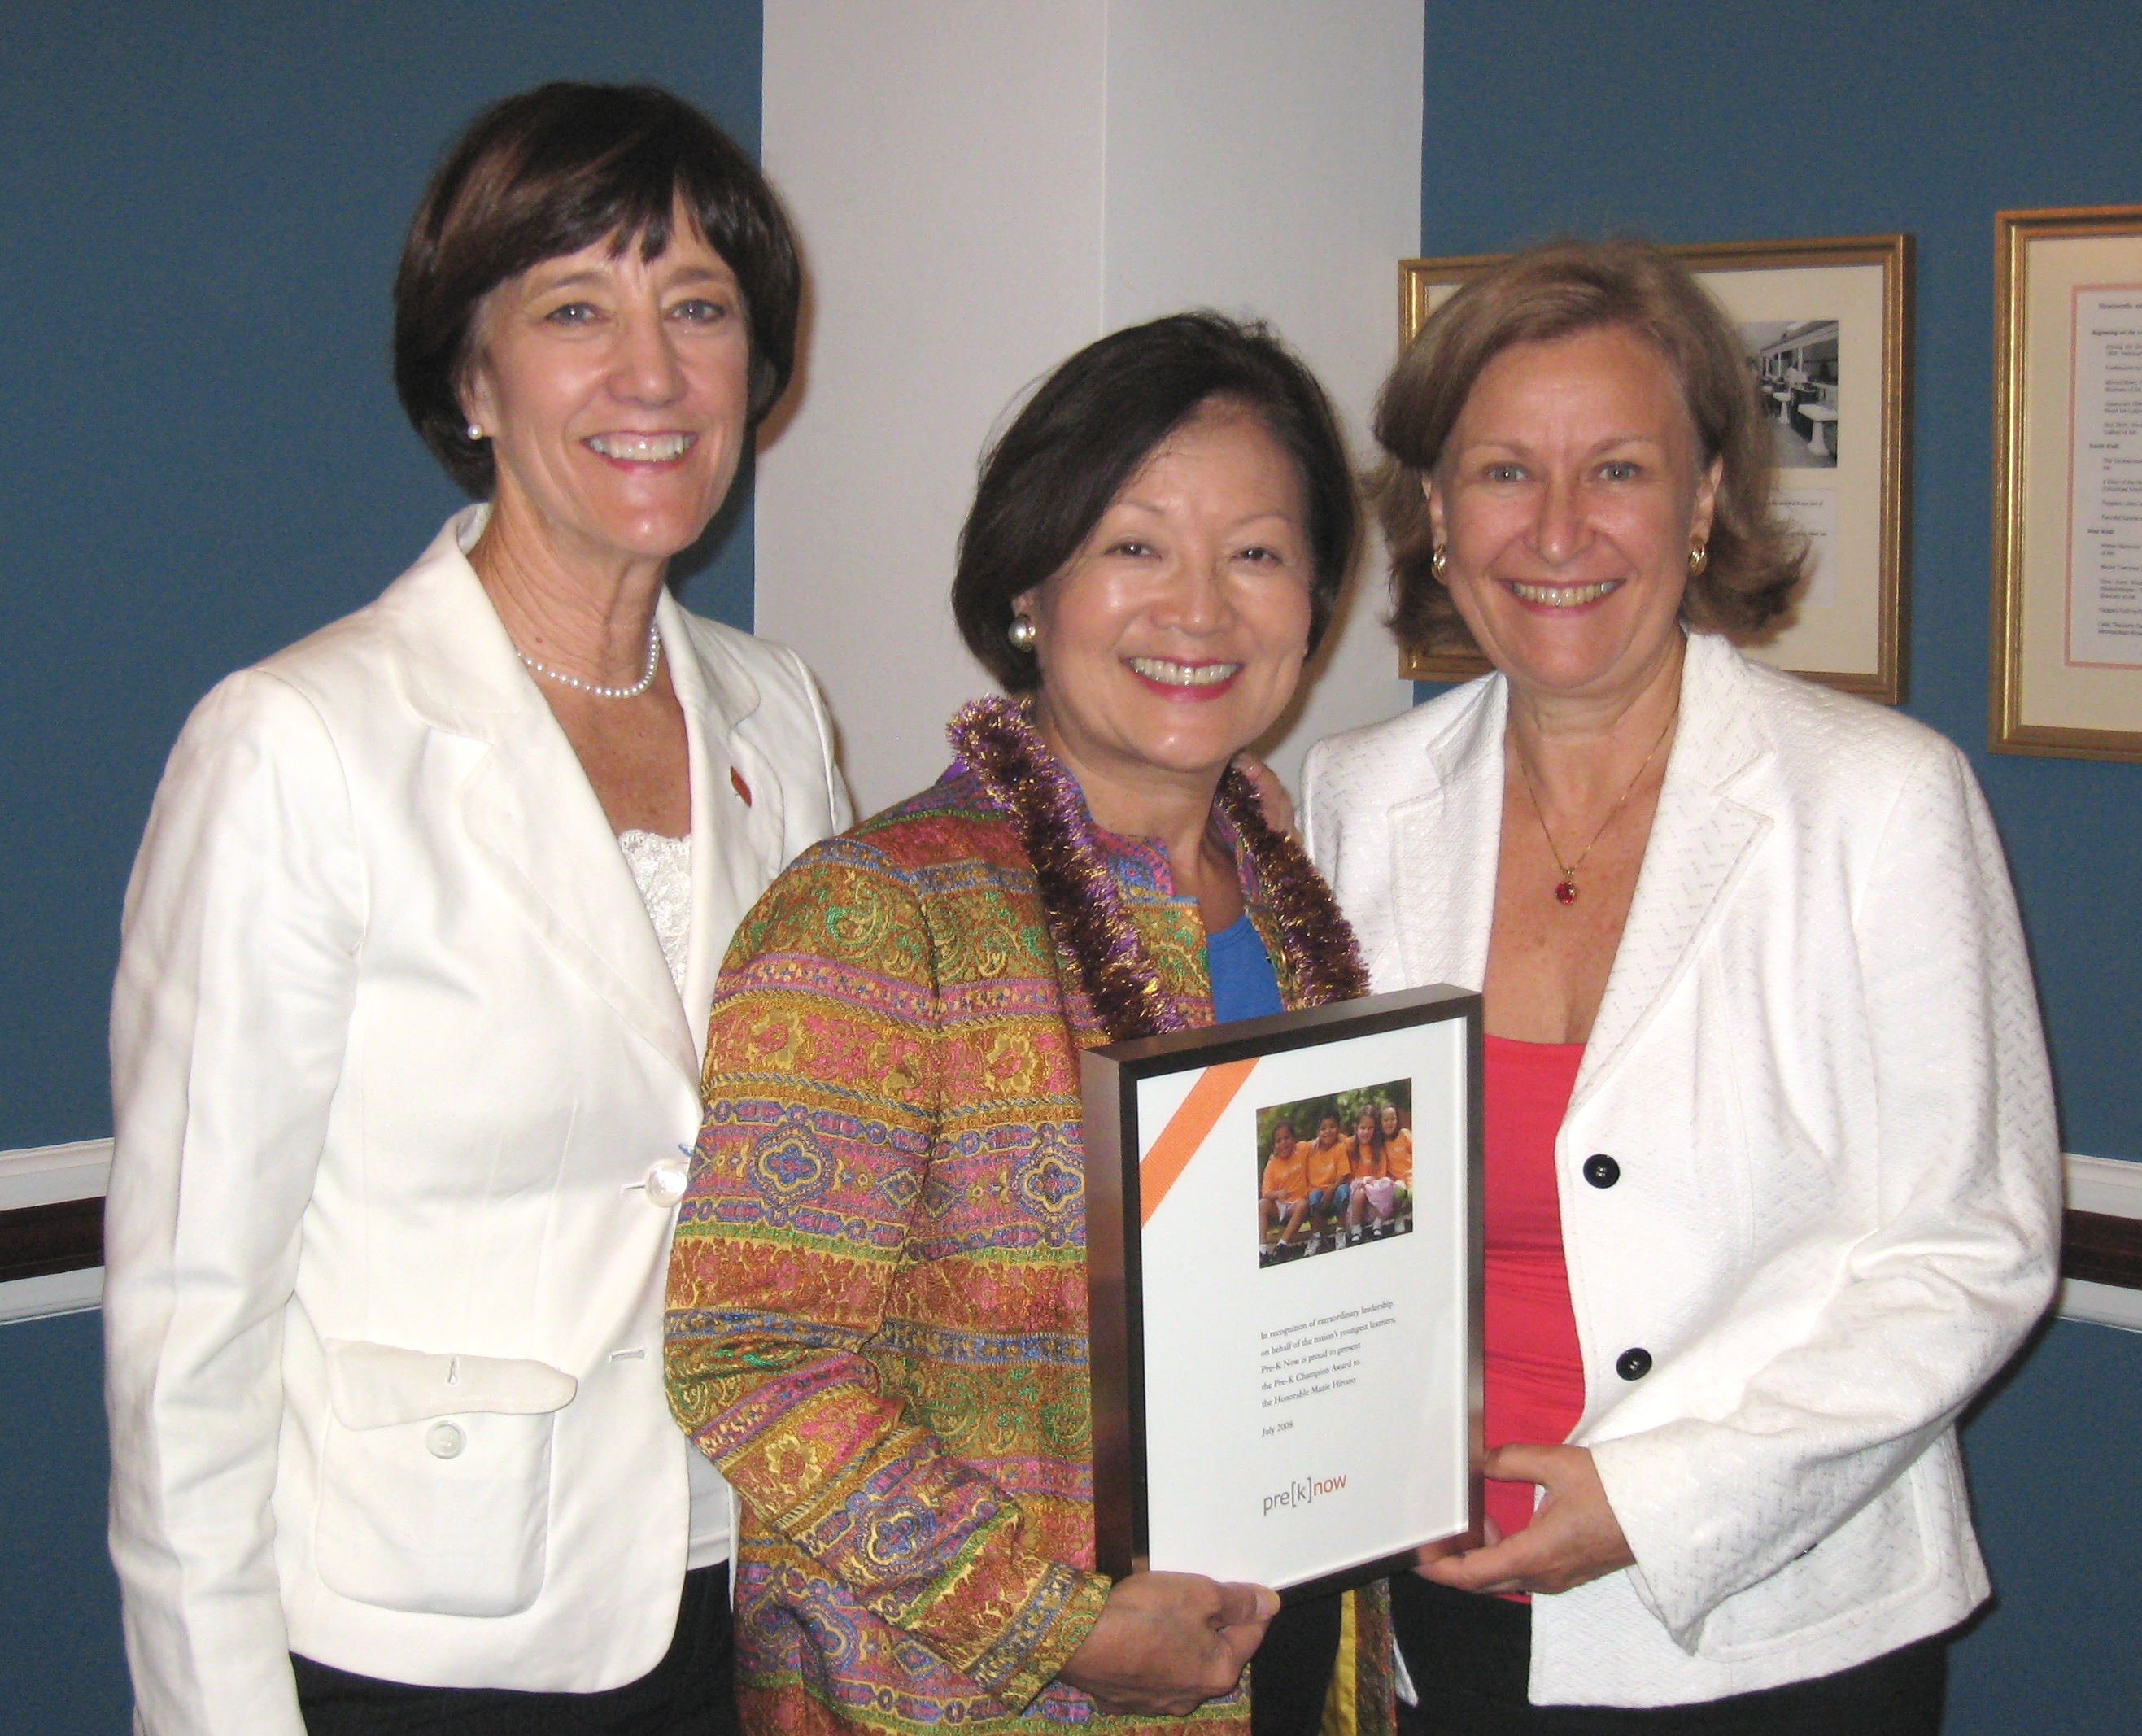 Libby Doggett, Congresswoman Hirono and Jacqueline Rose, 2007-08 National Head Start Fellow, from Hawaii 